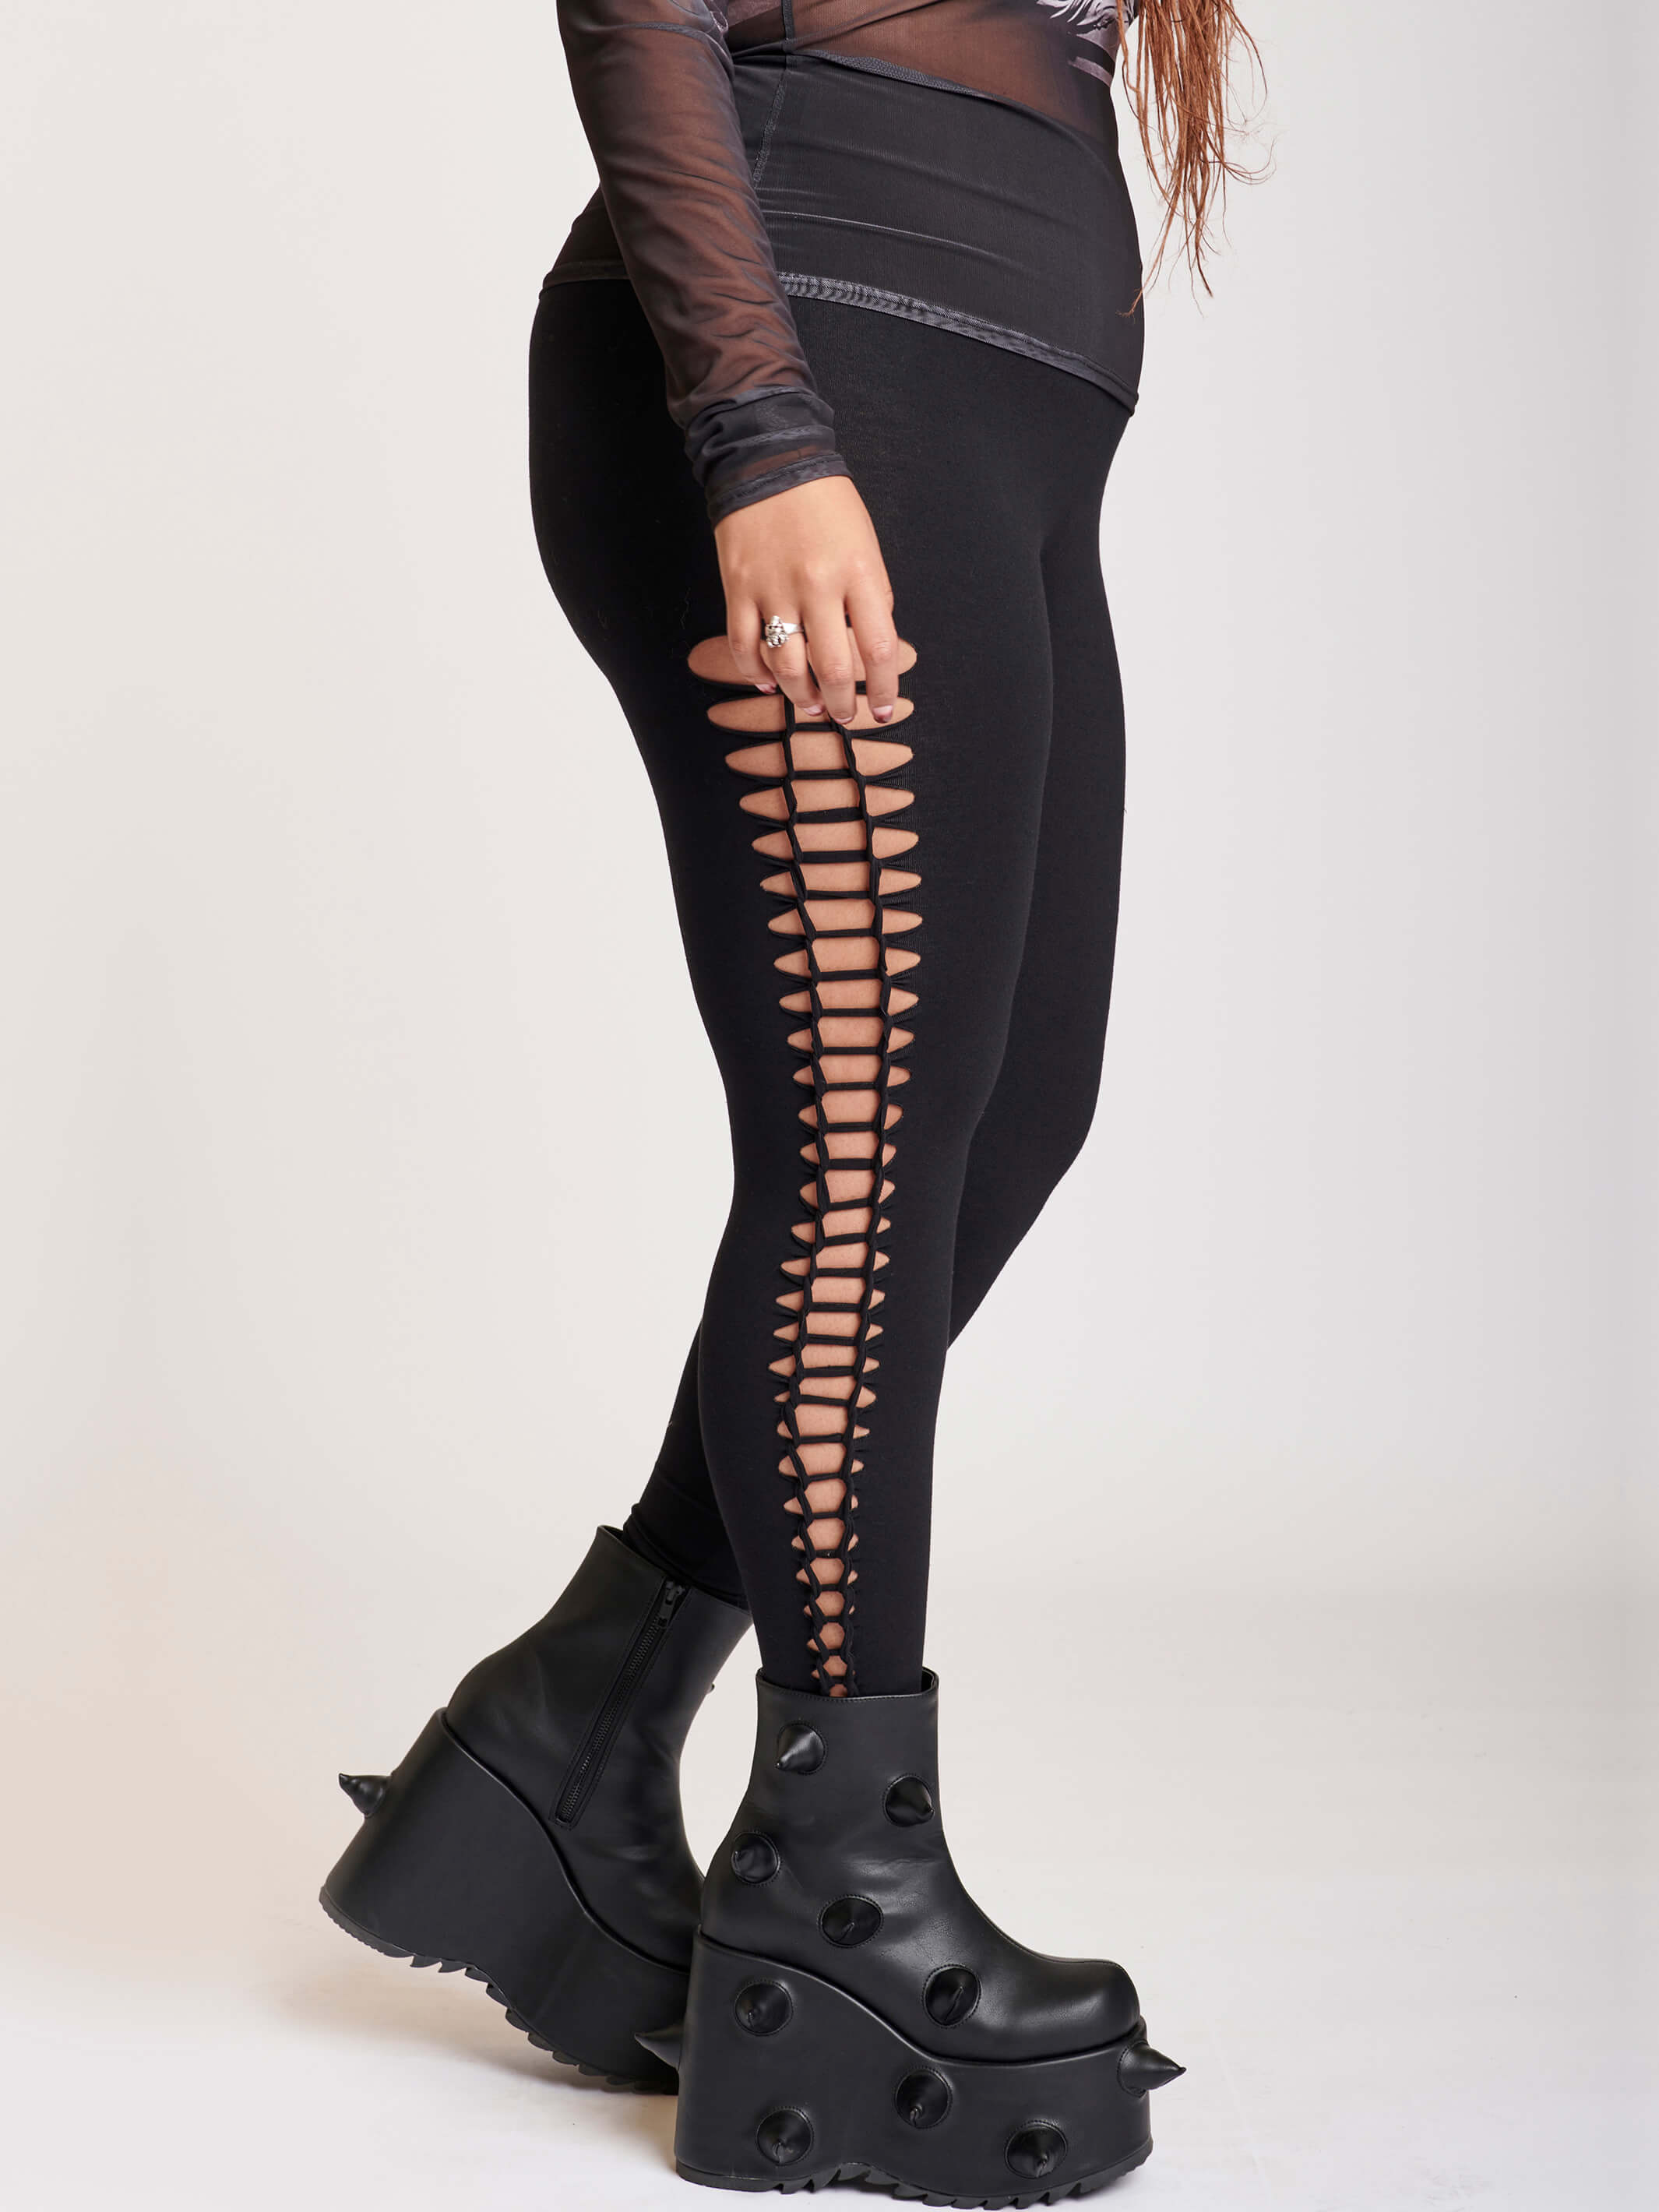 CLOSEOUT CLEARANCE! Plus Size Black Stretchy Side Lace Leggings LG